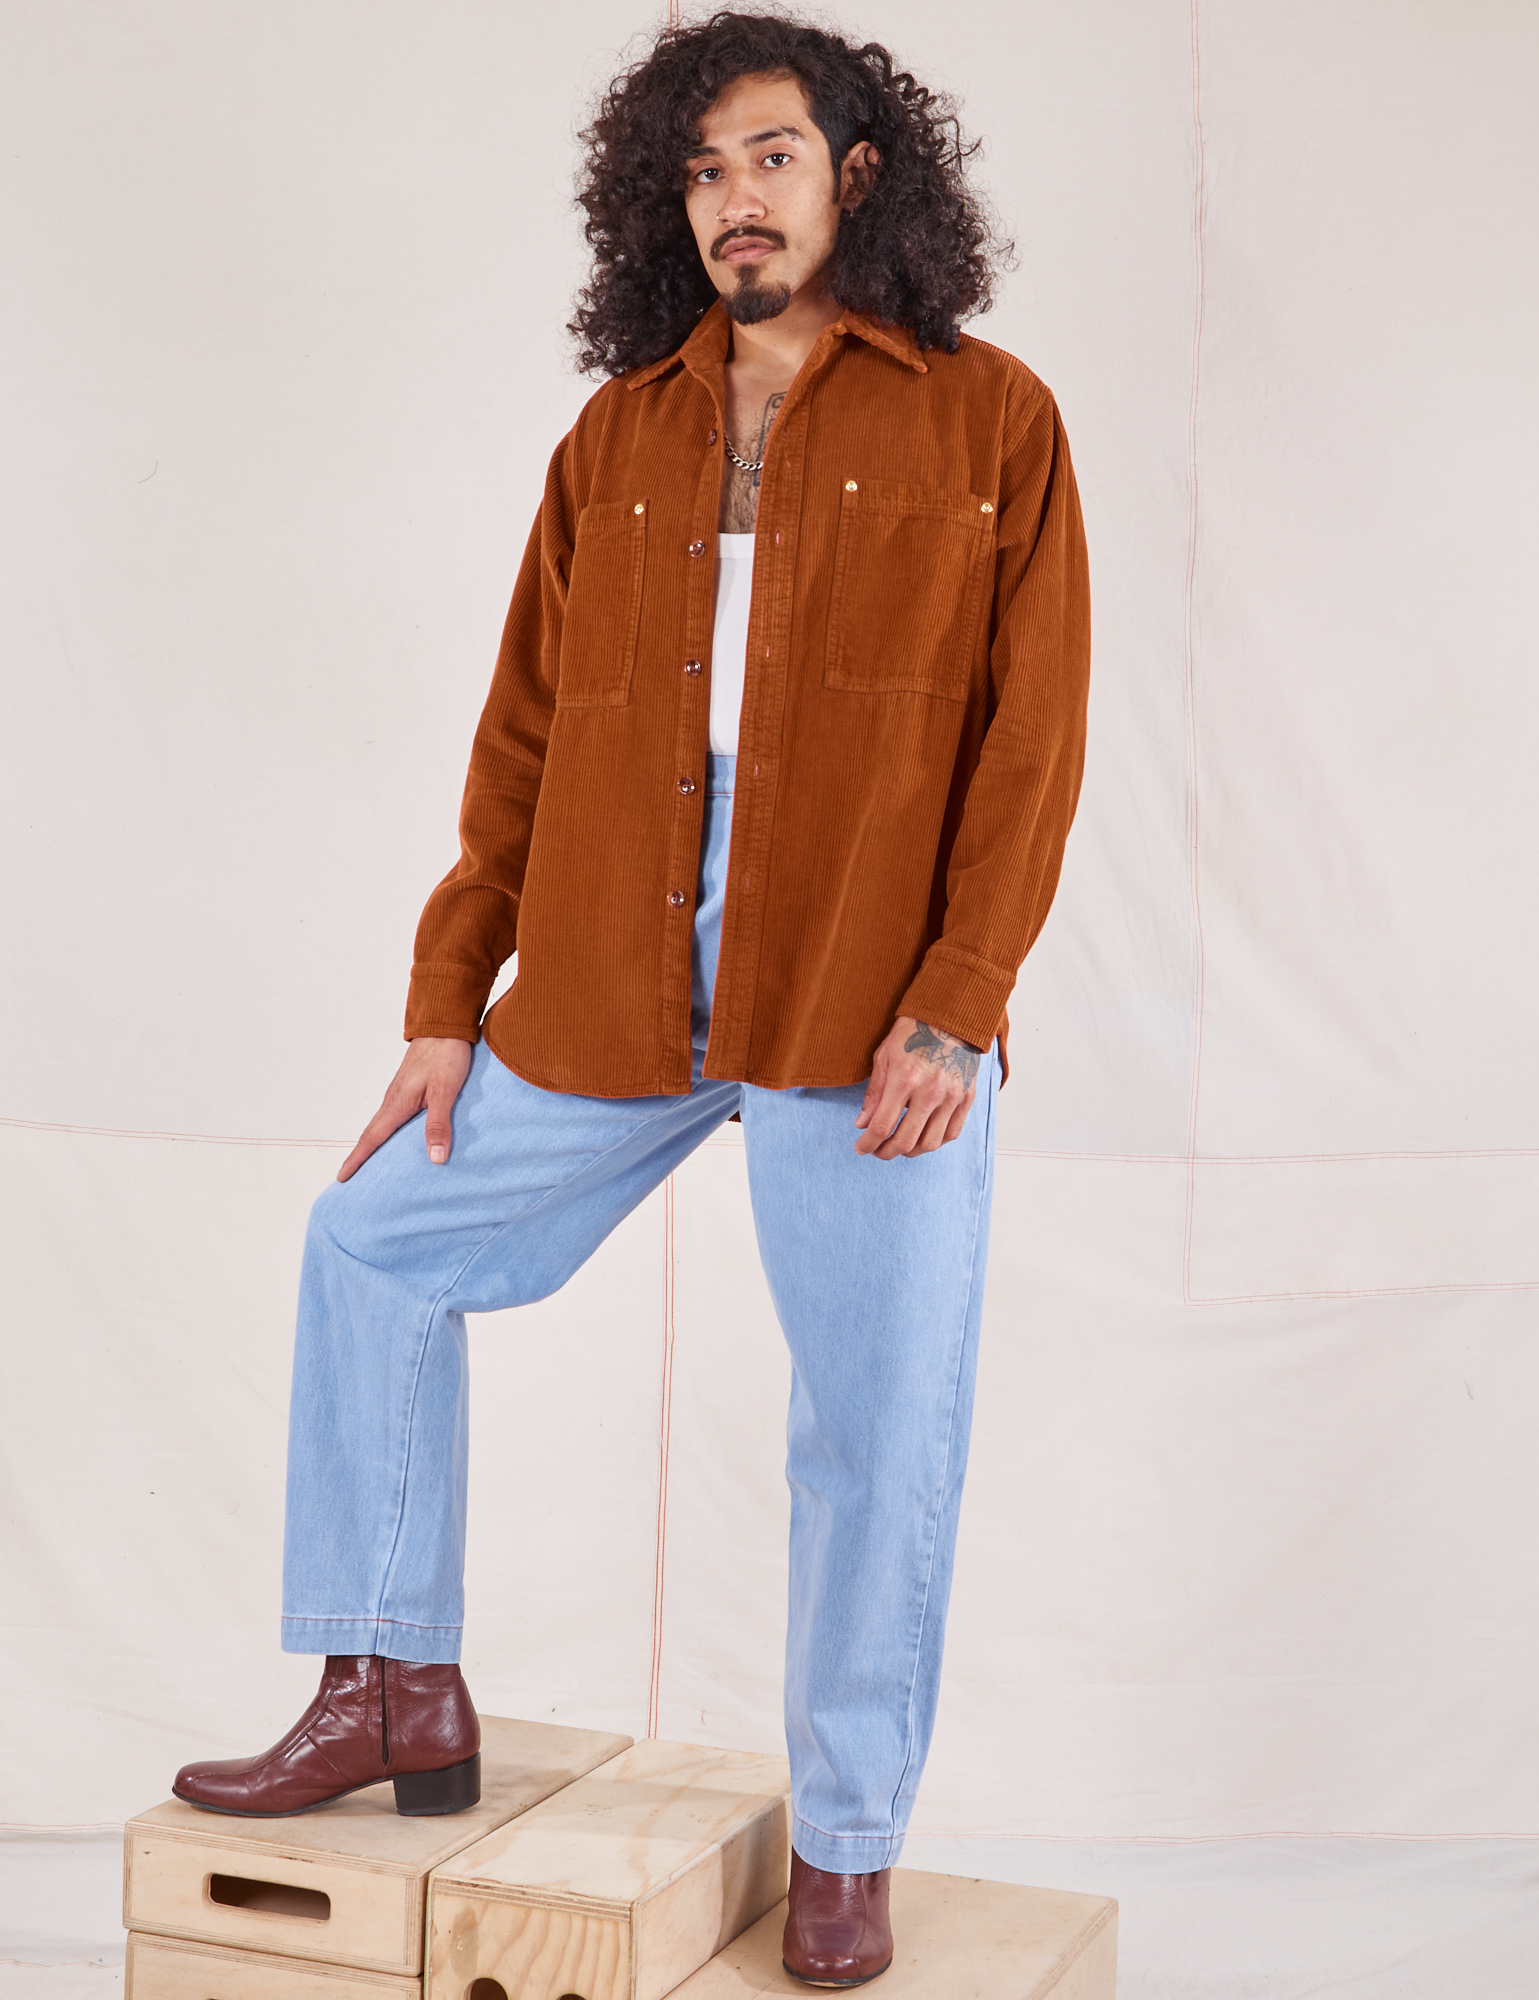 Jesse is wearing Corduroy Overshirt in Burnt Terracotta and light wash Denim Trouser Jeans